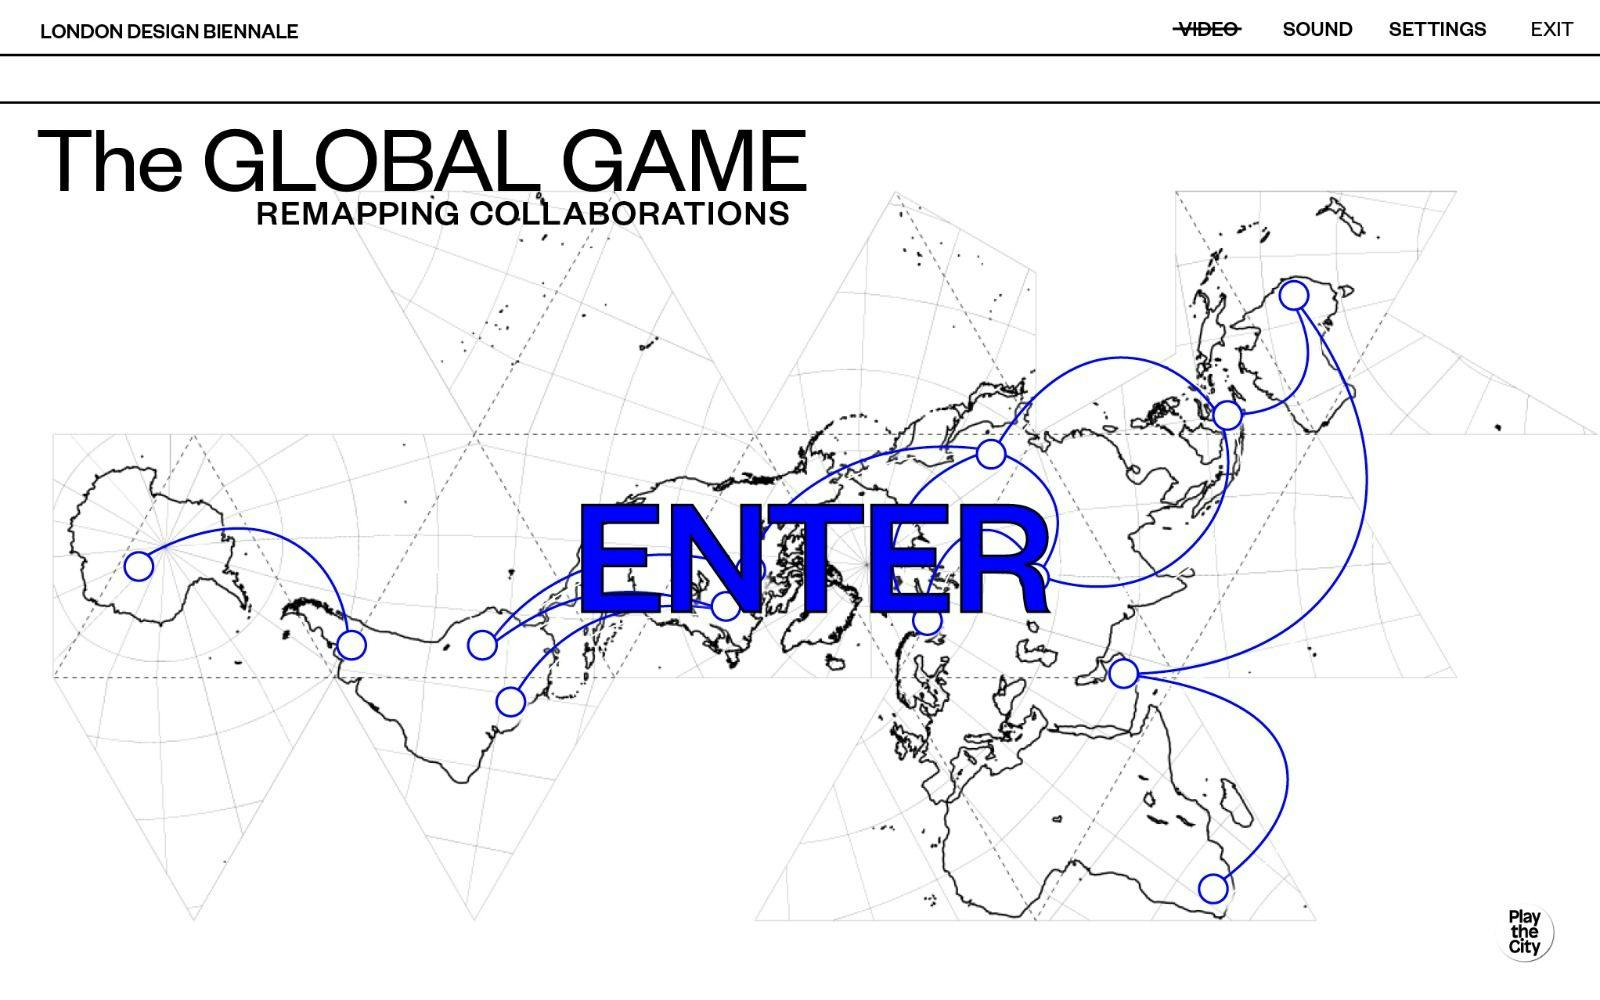 Screenshot from The Global Game. It shows a white background with an outline of a map, where different countries and regions are labelled.